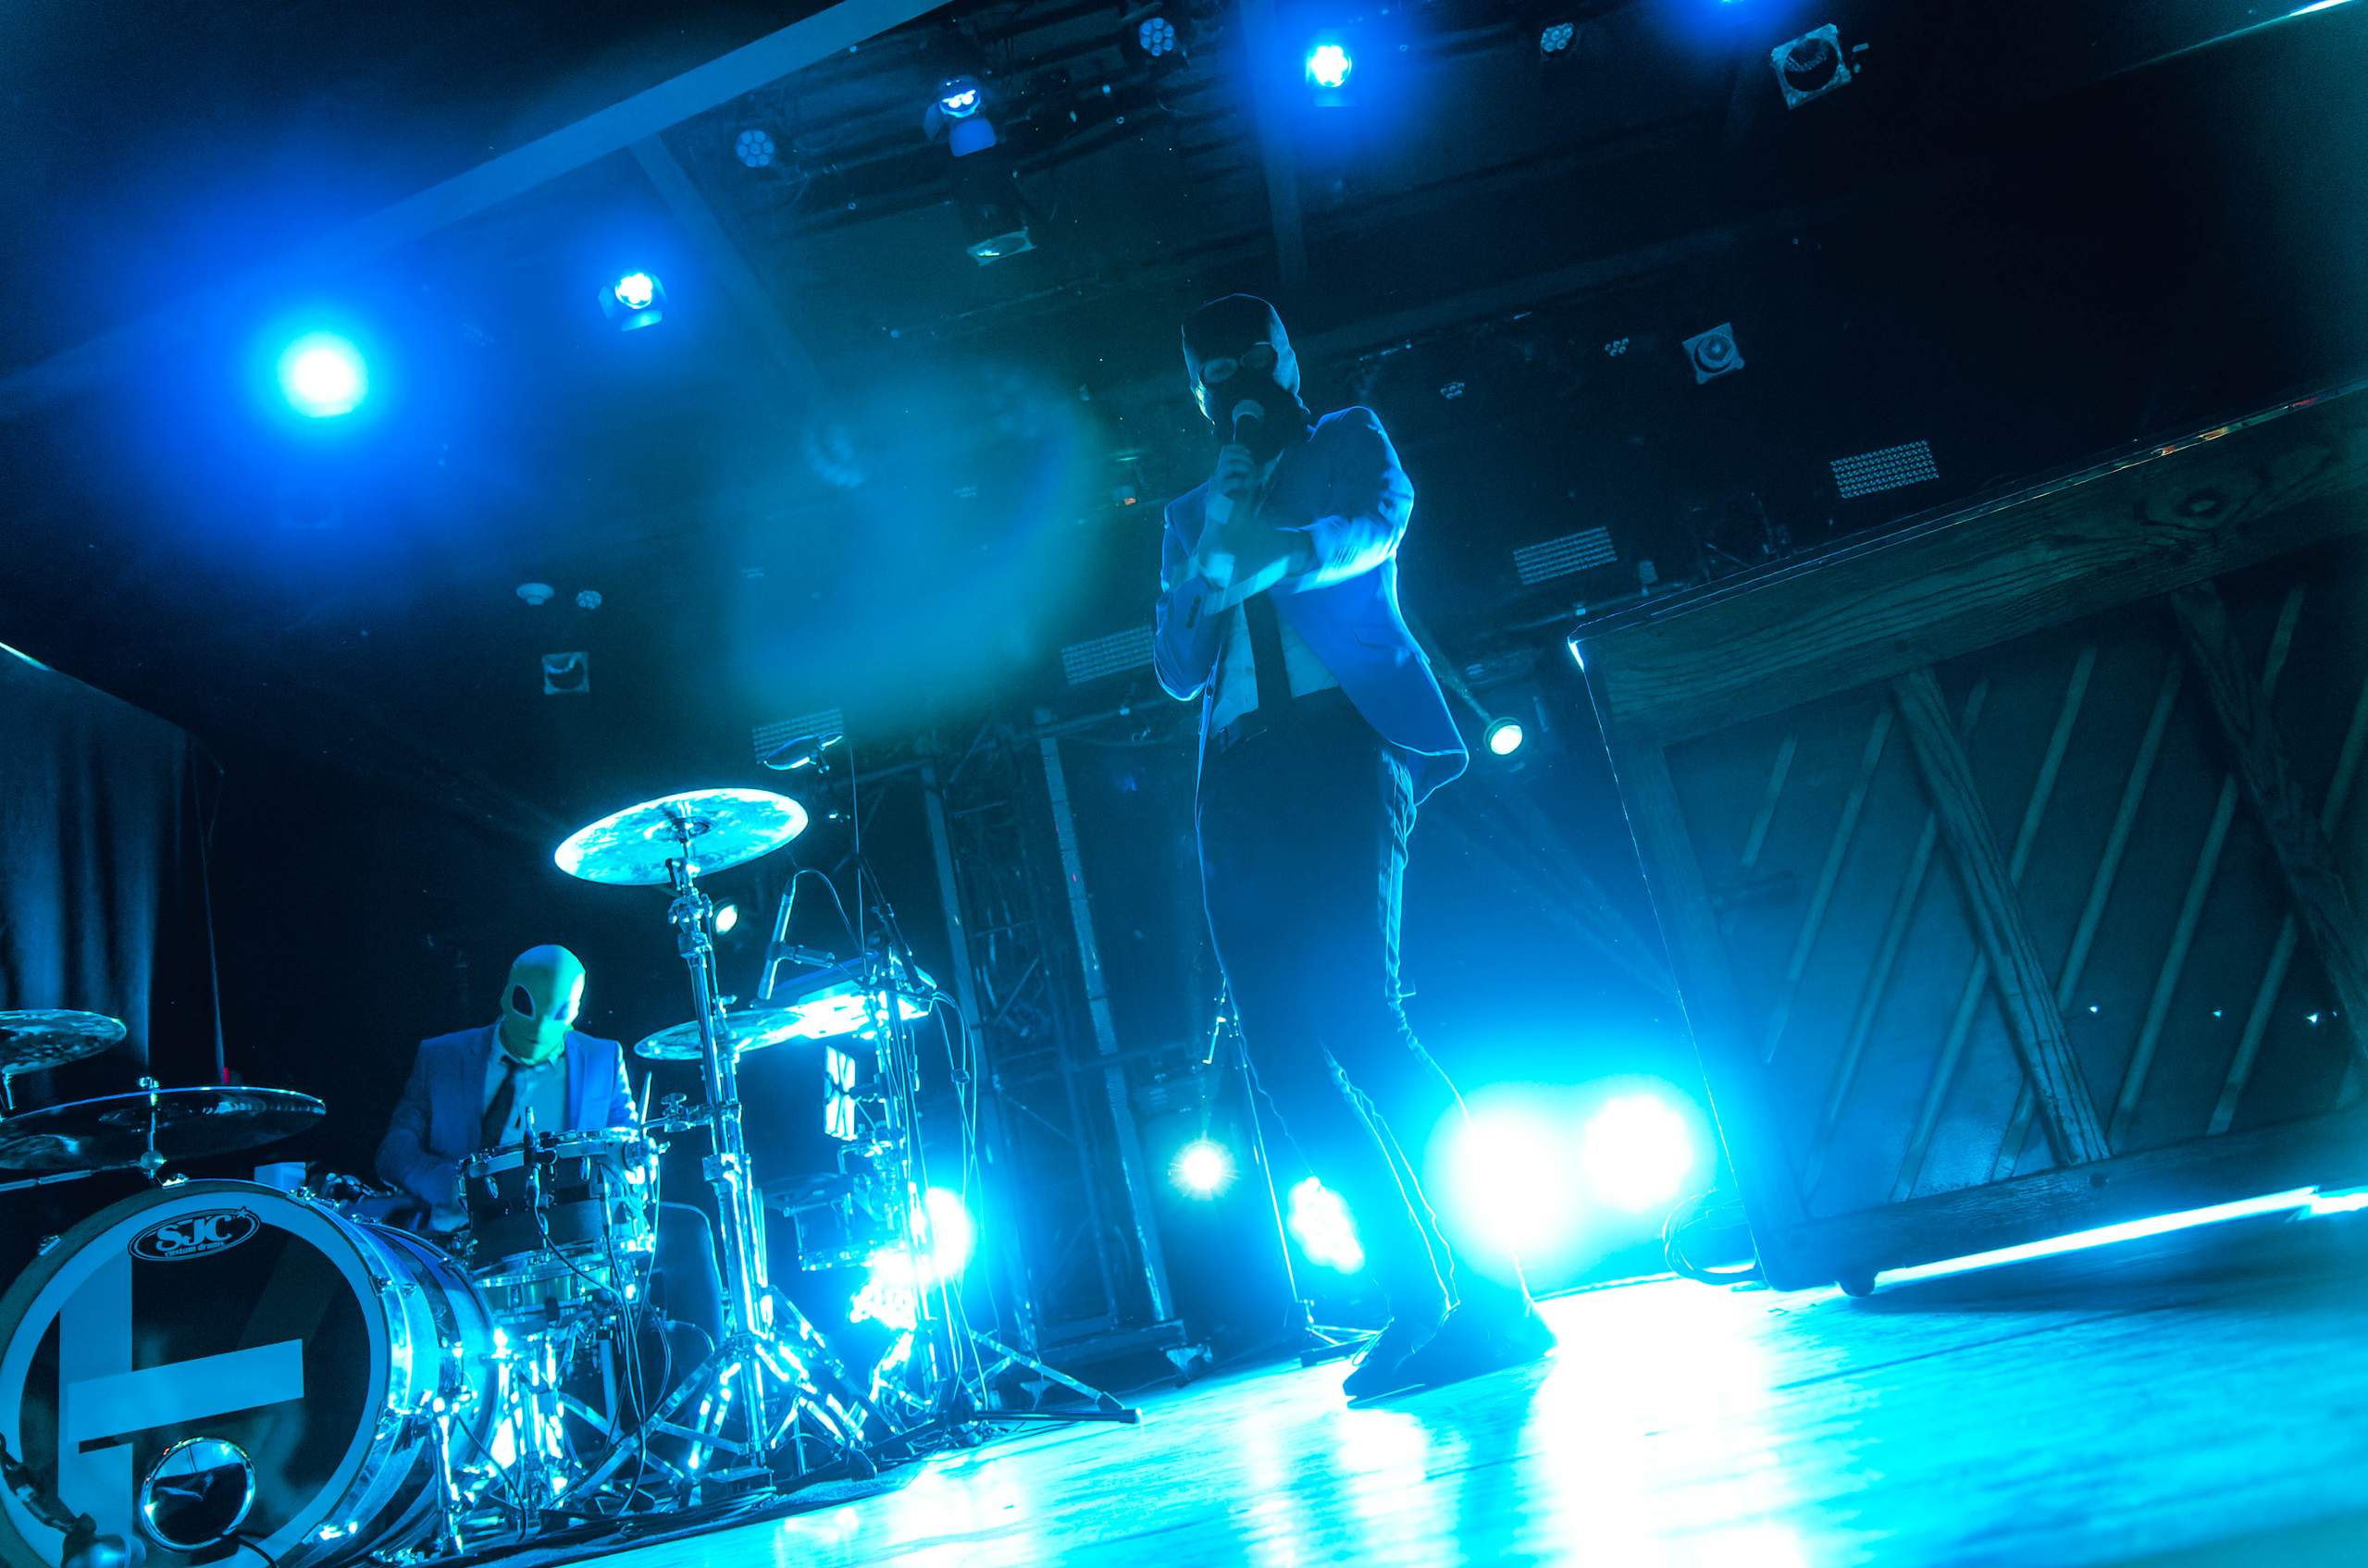 21 Pilots performing at The Majestic in Madison, WI April 16th, 2014, photography by Ross Harried for Second Crop Music